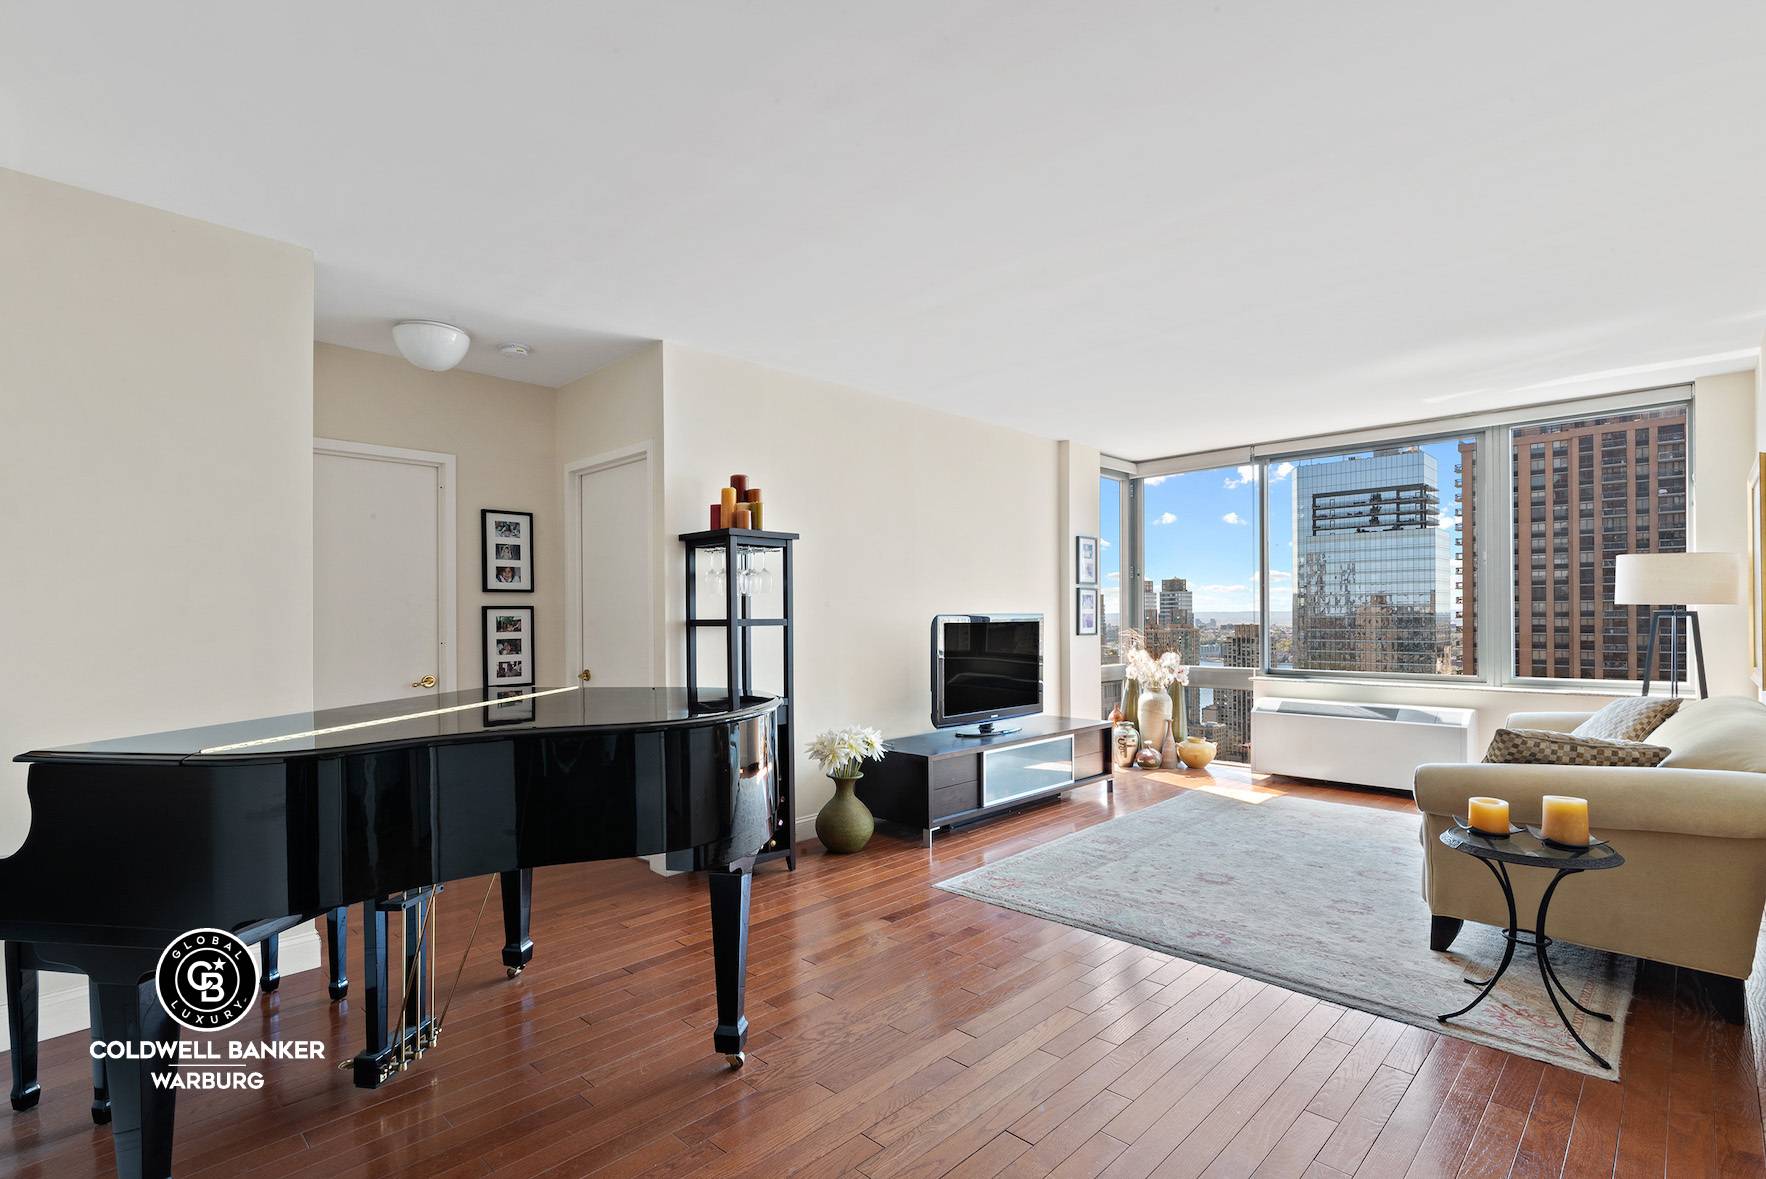 Come see the fabulous views from every window in this spacious, high floor, split two bedroom, two bathroom home in the highly coveted Park Millennium Tower in Lincoln Square.